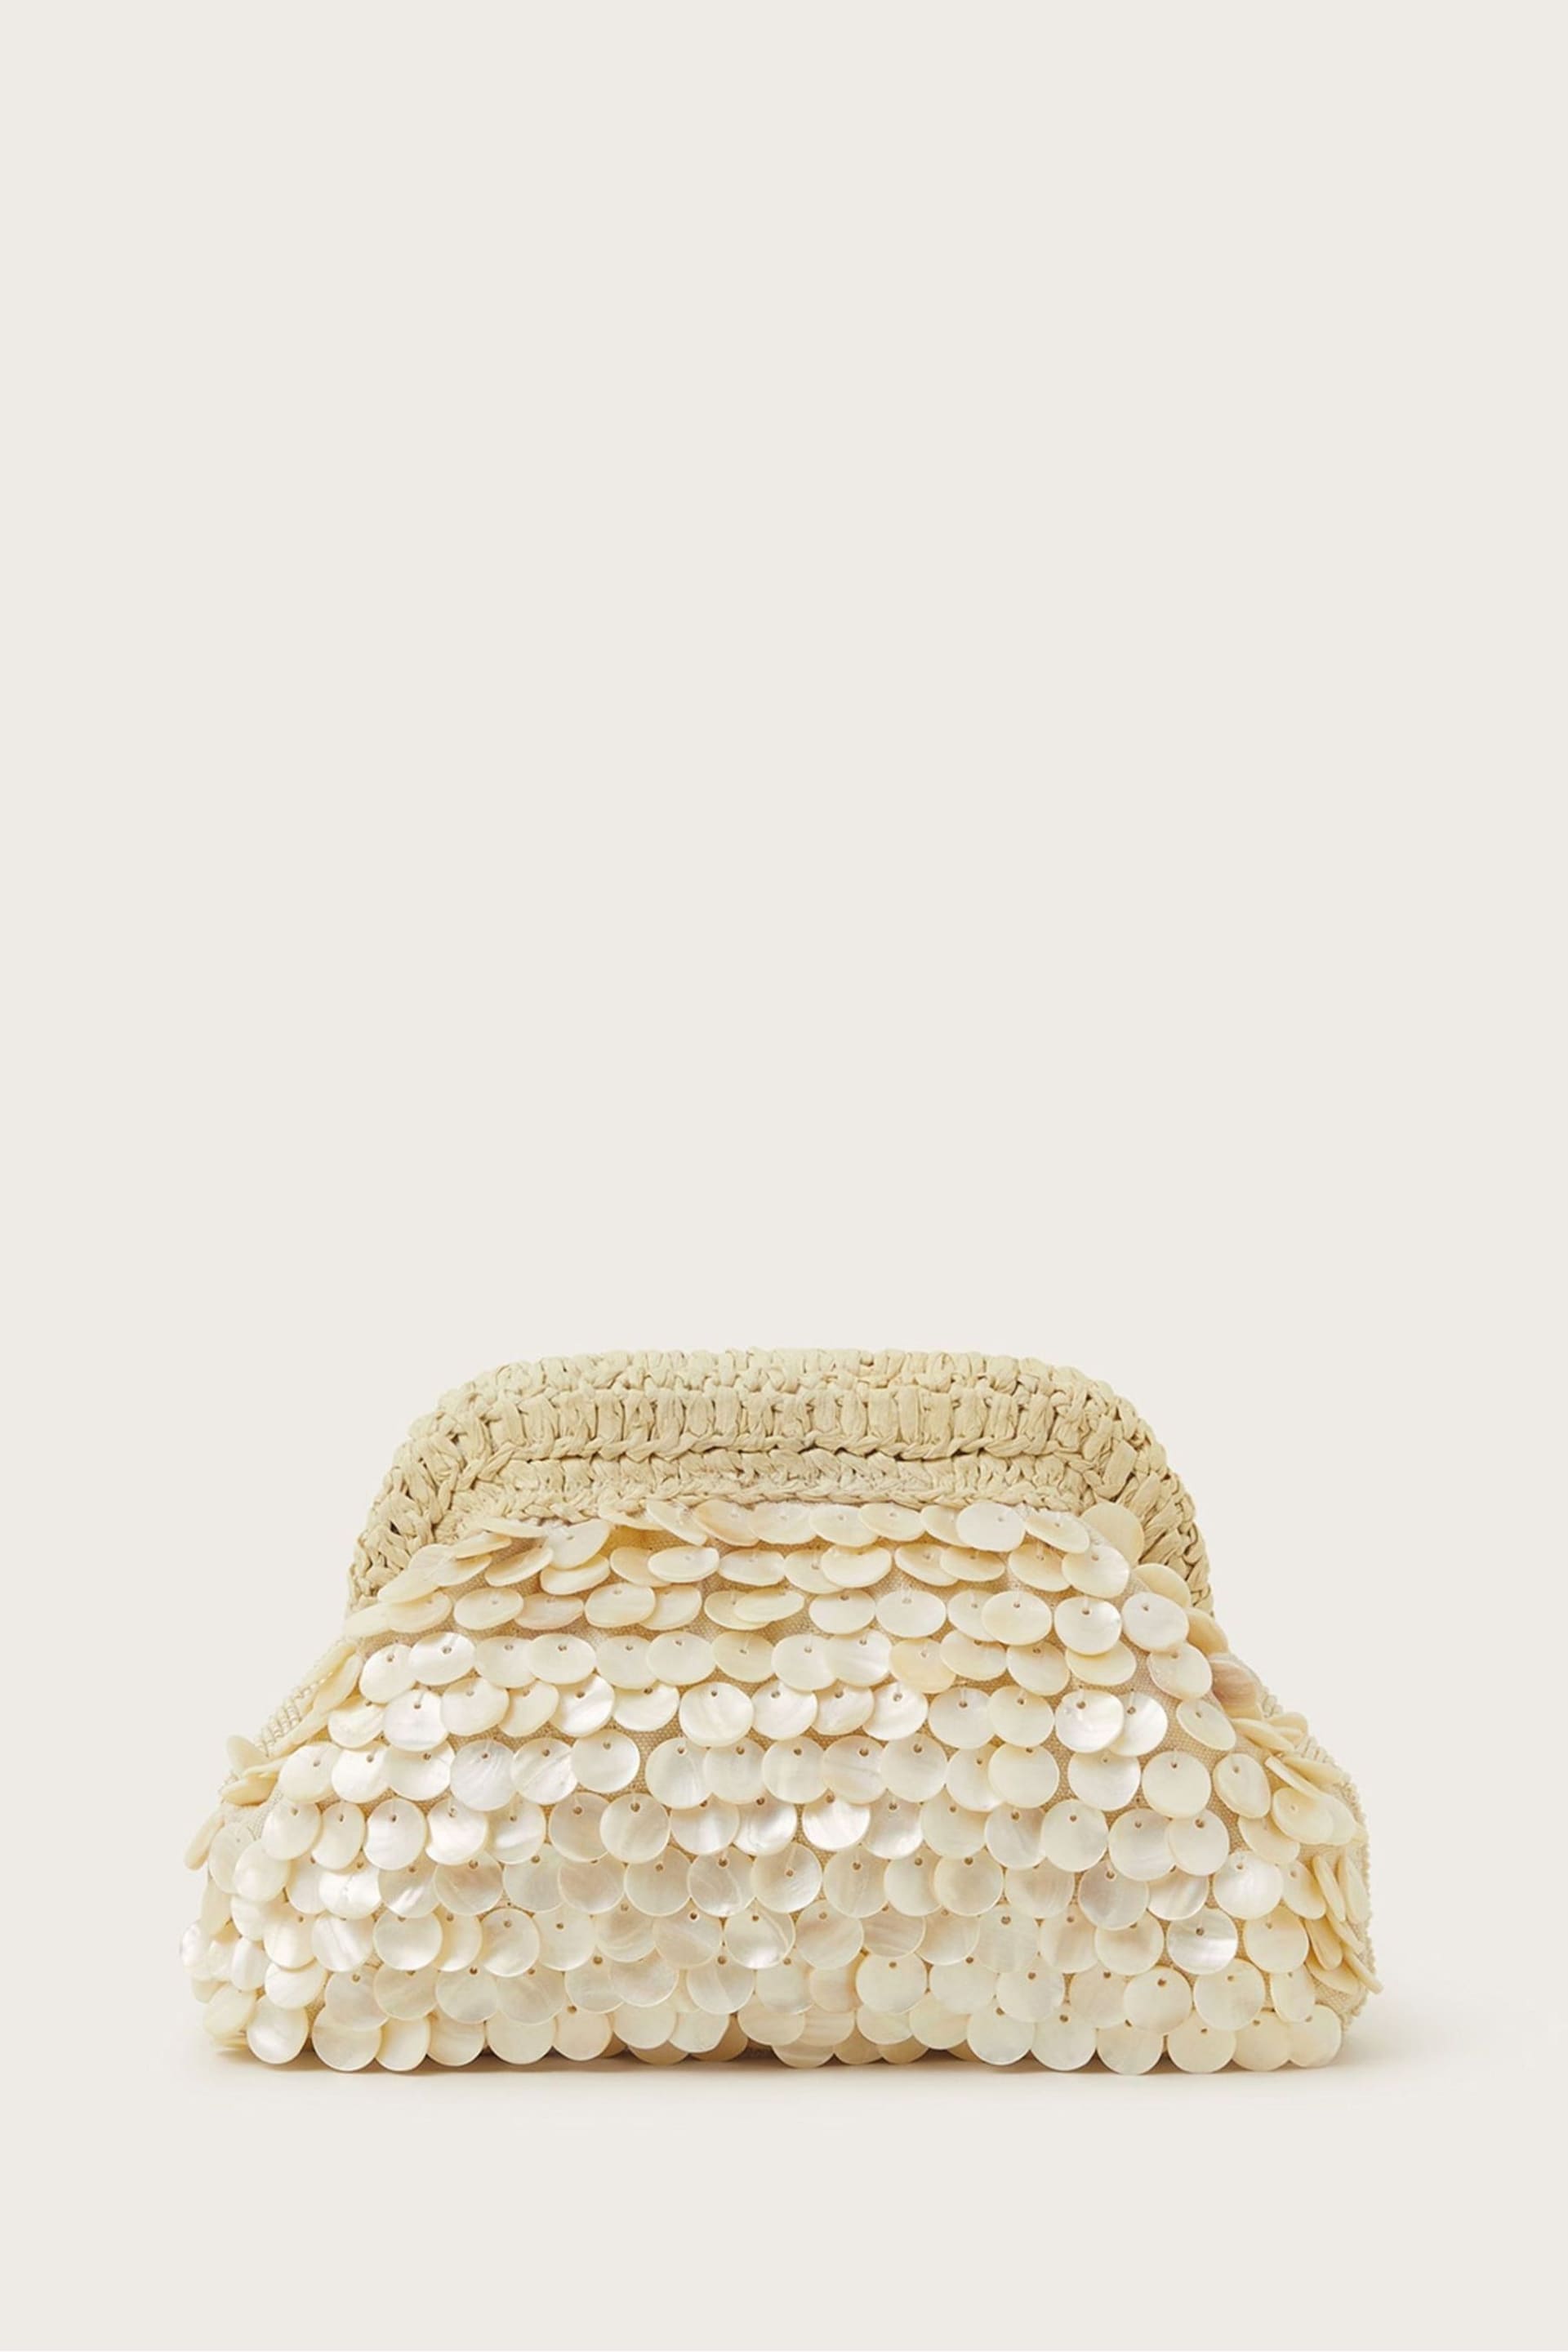 Monsoon Natural Hand-Beaded Shell Clutch - Image 2 of 4